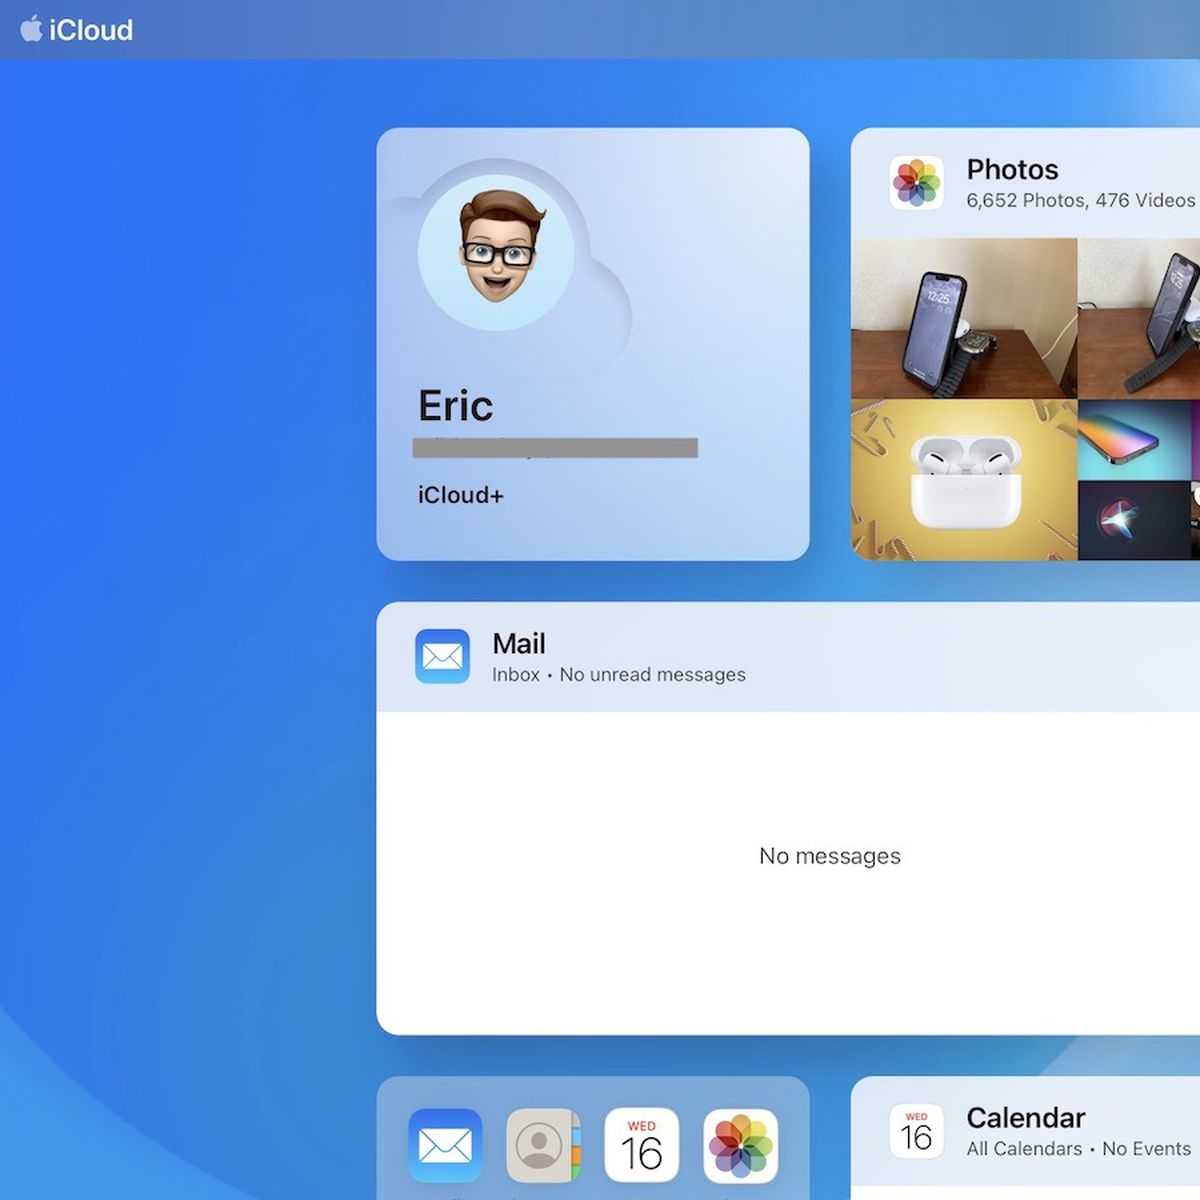 Web-Based iCloud Mail Redesign, Hide My Email, and Custom Domain Features  Now Live - MacRumors